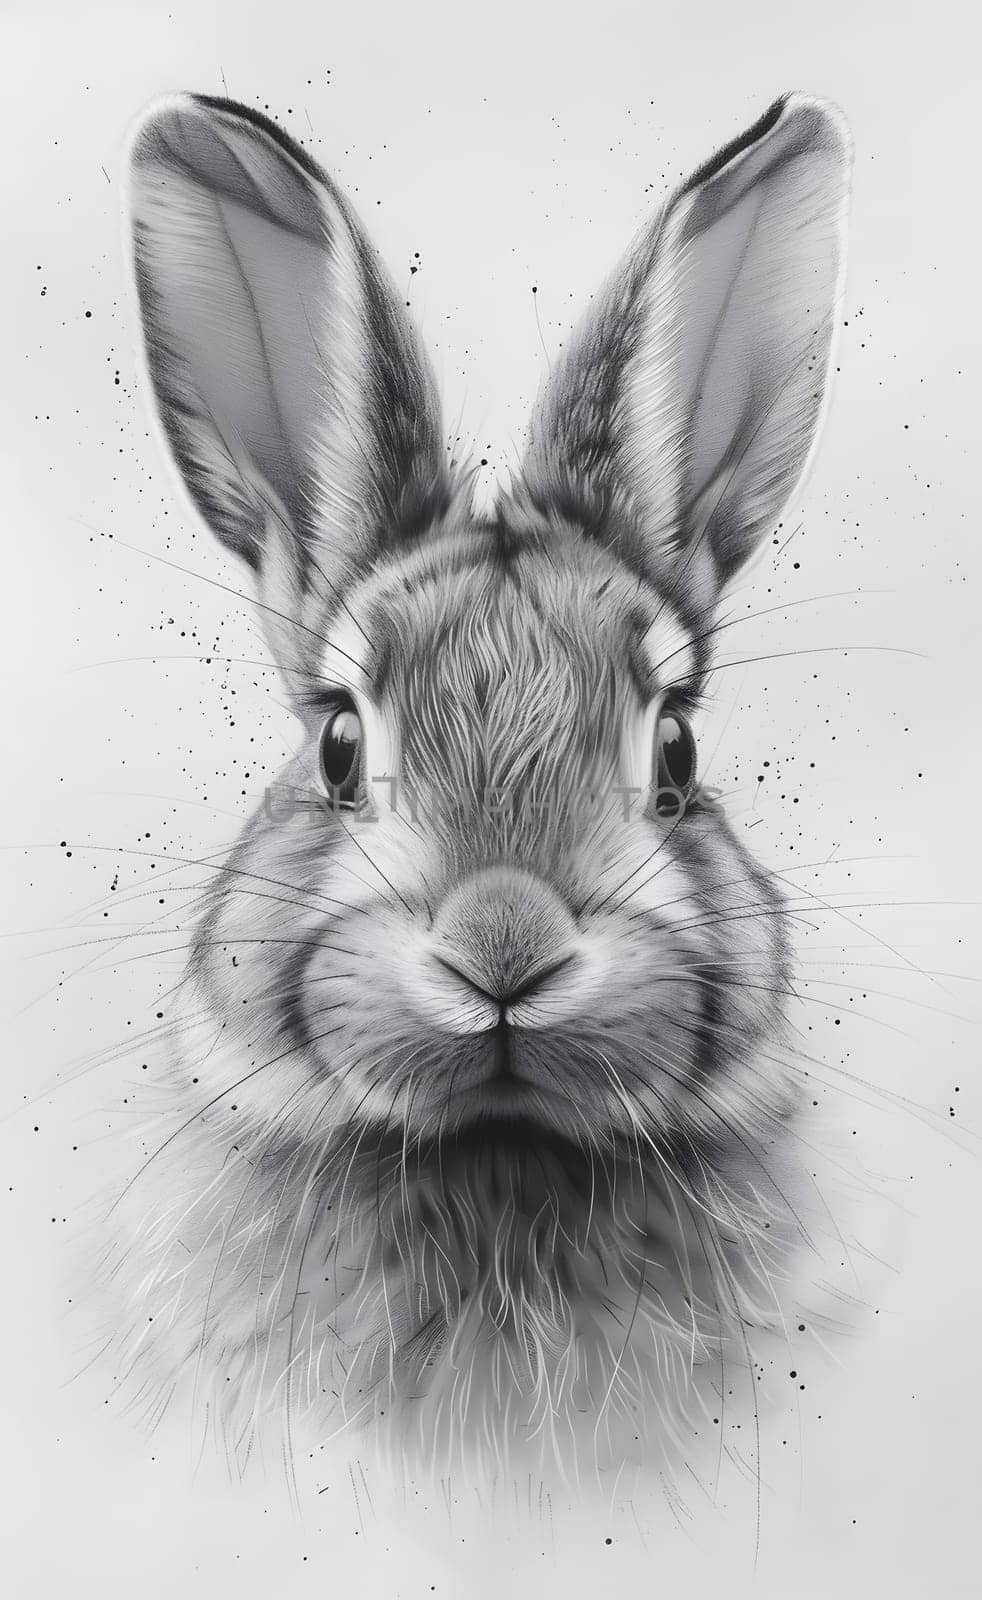 A monochrome drawing of a rabbit staring at the camera, showcasing its ear, whiskers, snout. A depiction of both rabbits and hares, this terrestrial animal is captured in monochrome photography